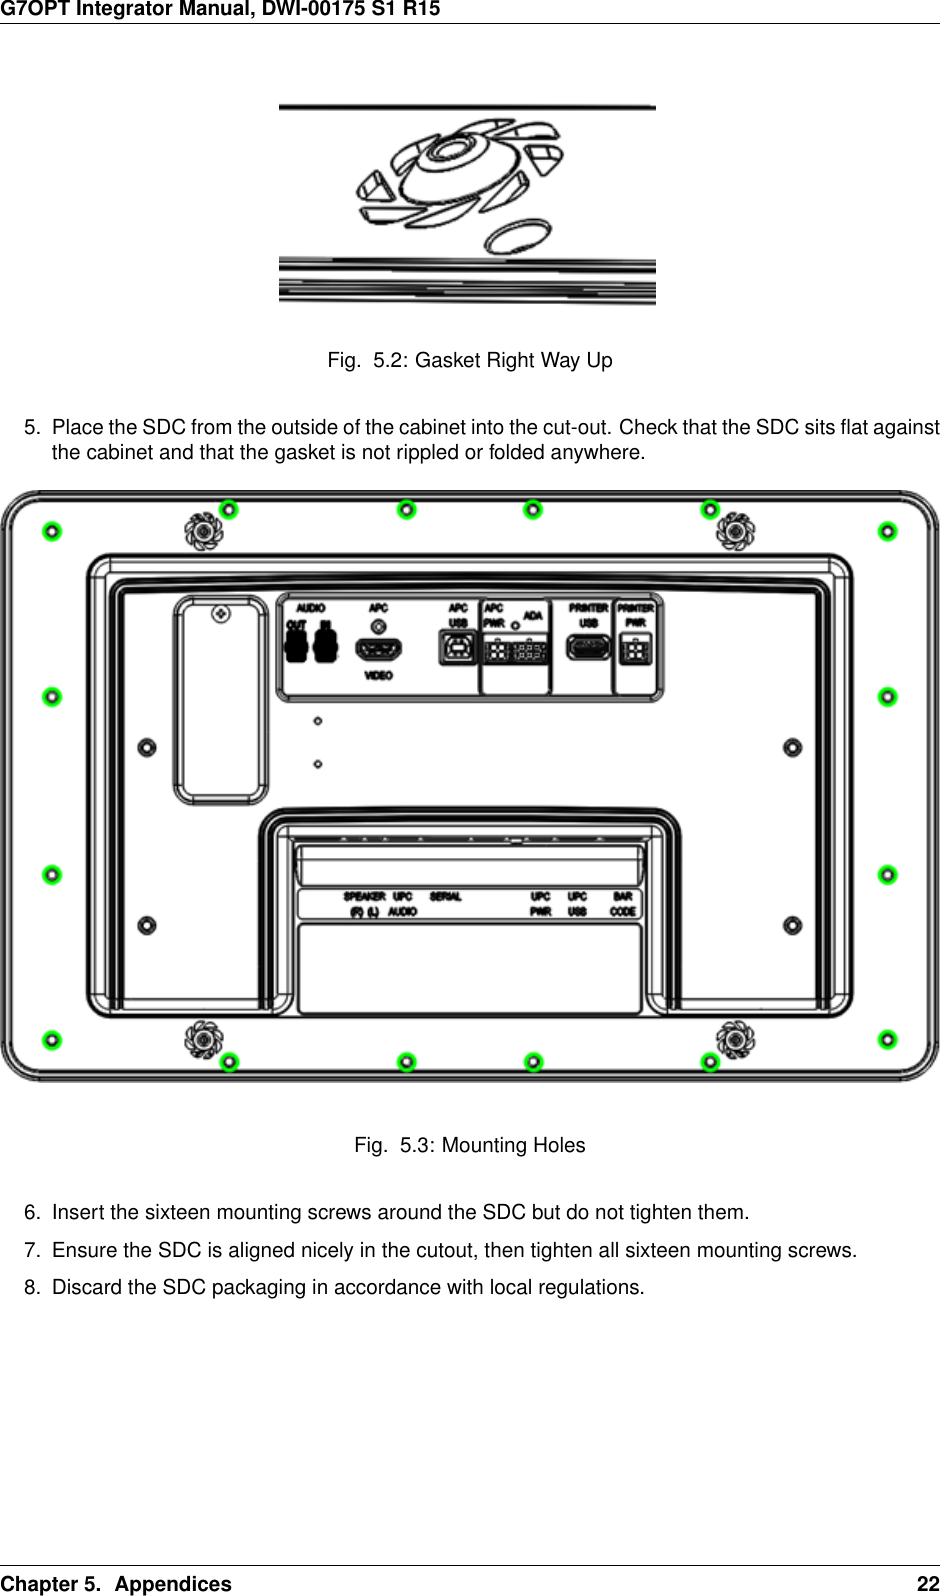 G7OPT Integrator Manual, DWI-00175 S1 R15Fig. 5.2: Gasket Right Way Up5. Place the SDC from the outside of the cabinet into the cut-out. Check that the SDC sits ﬂat againstthe cabinet and that the gasket is not rippled or folded anywhere.Fig. 5.3: Mounting Holes6. Insert the sixteen mounting screws around the SDC but do not tighten them.7. Ensure the SDC is aligned nicely in the cutout, then tighten all sixteen mounting screws.8. Discard the SDC packaging in accordance with local regulations.Chapter 5. Appendices 22